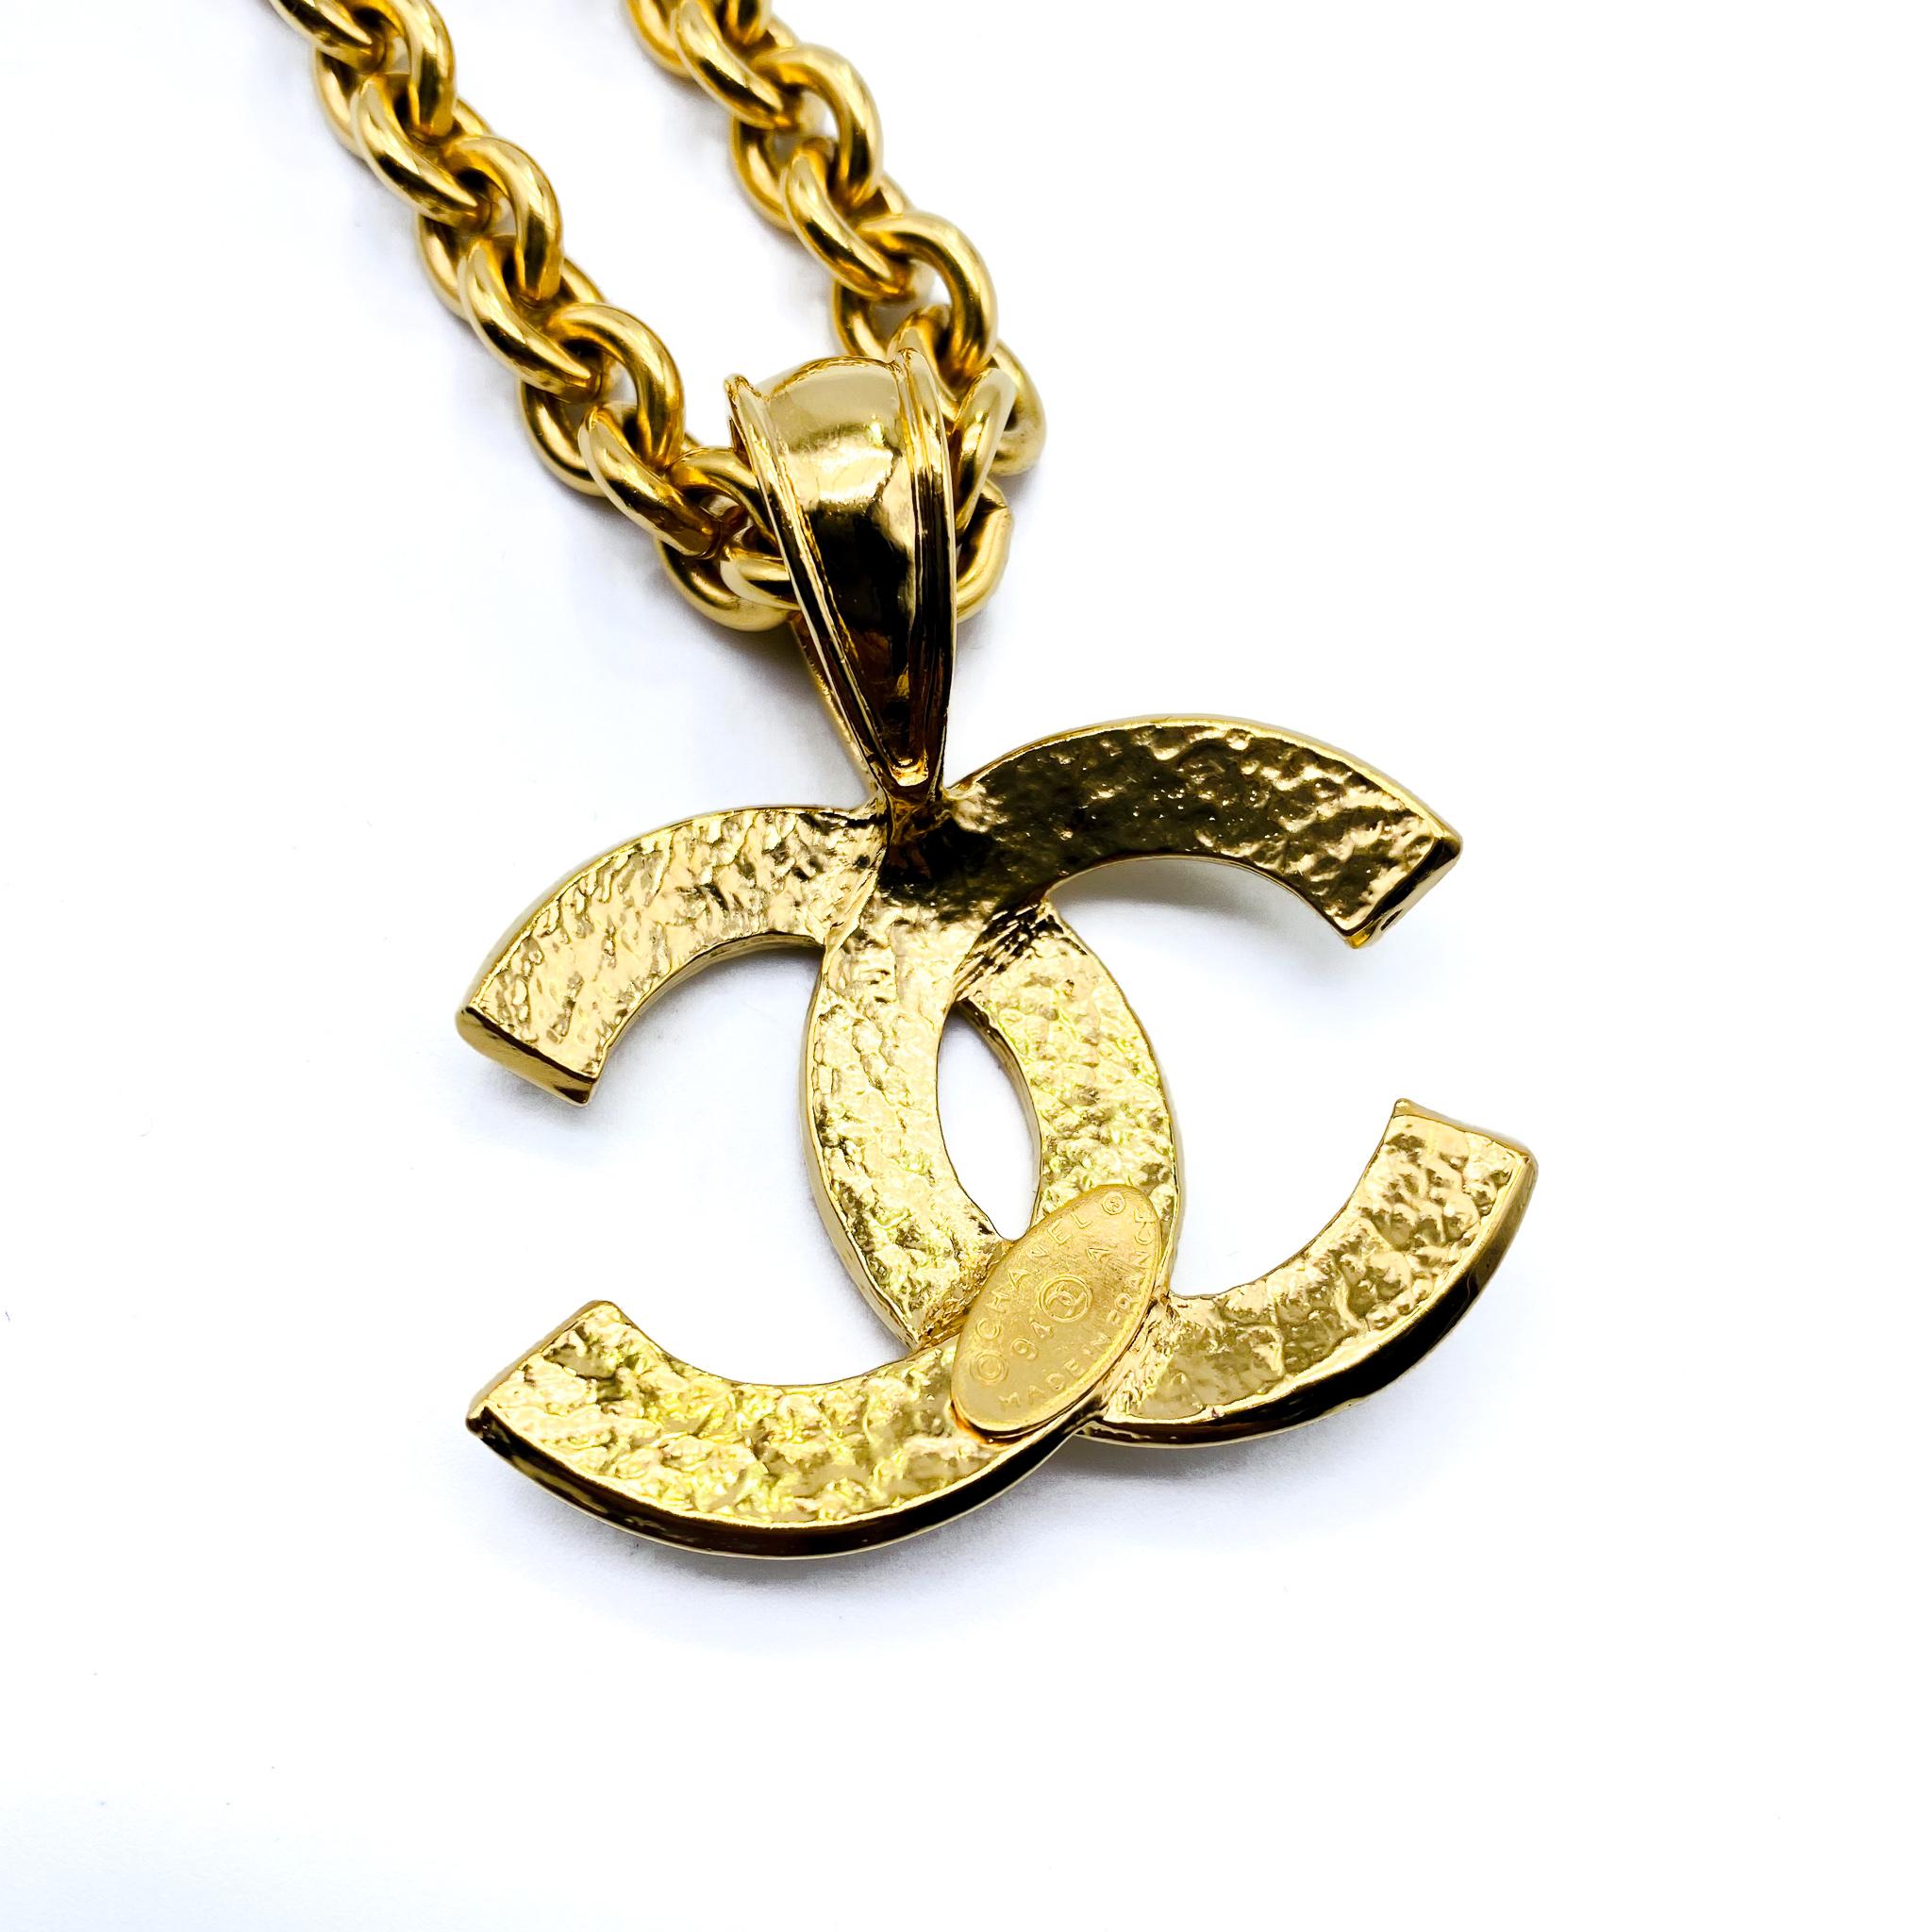 Vintage Chanel Necklace 1990s - 1994 AW Collection 2